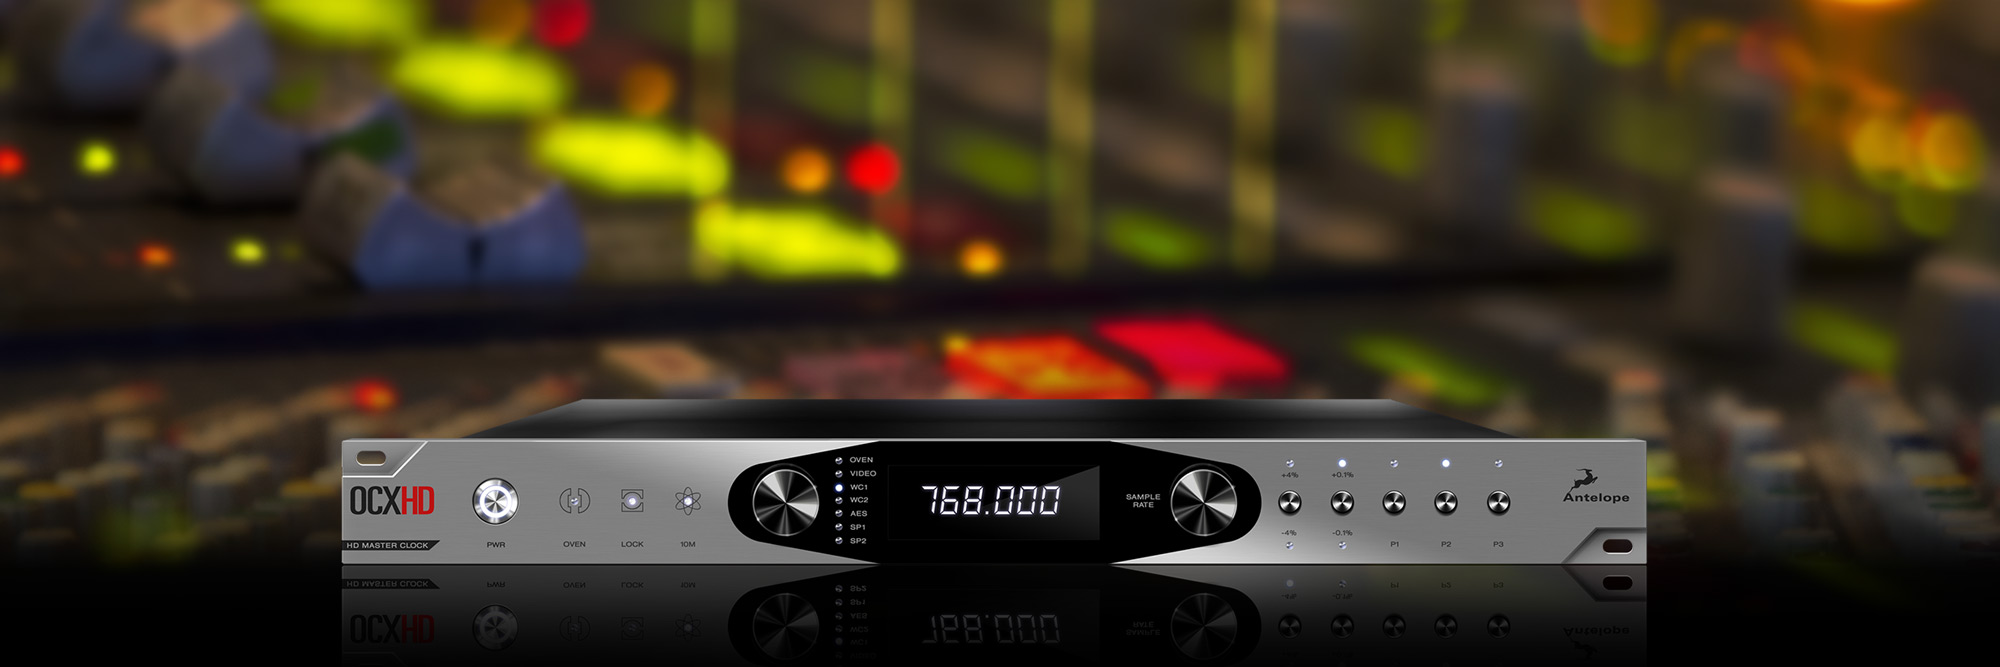 The New OCX HD Master Clock from Antelope Audio: The Culmination of Two Decades of Leadership in Digital Audio Technologies